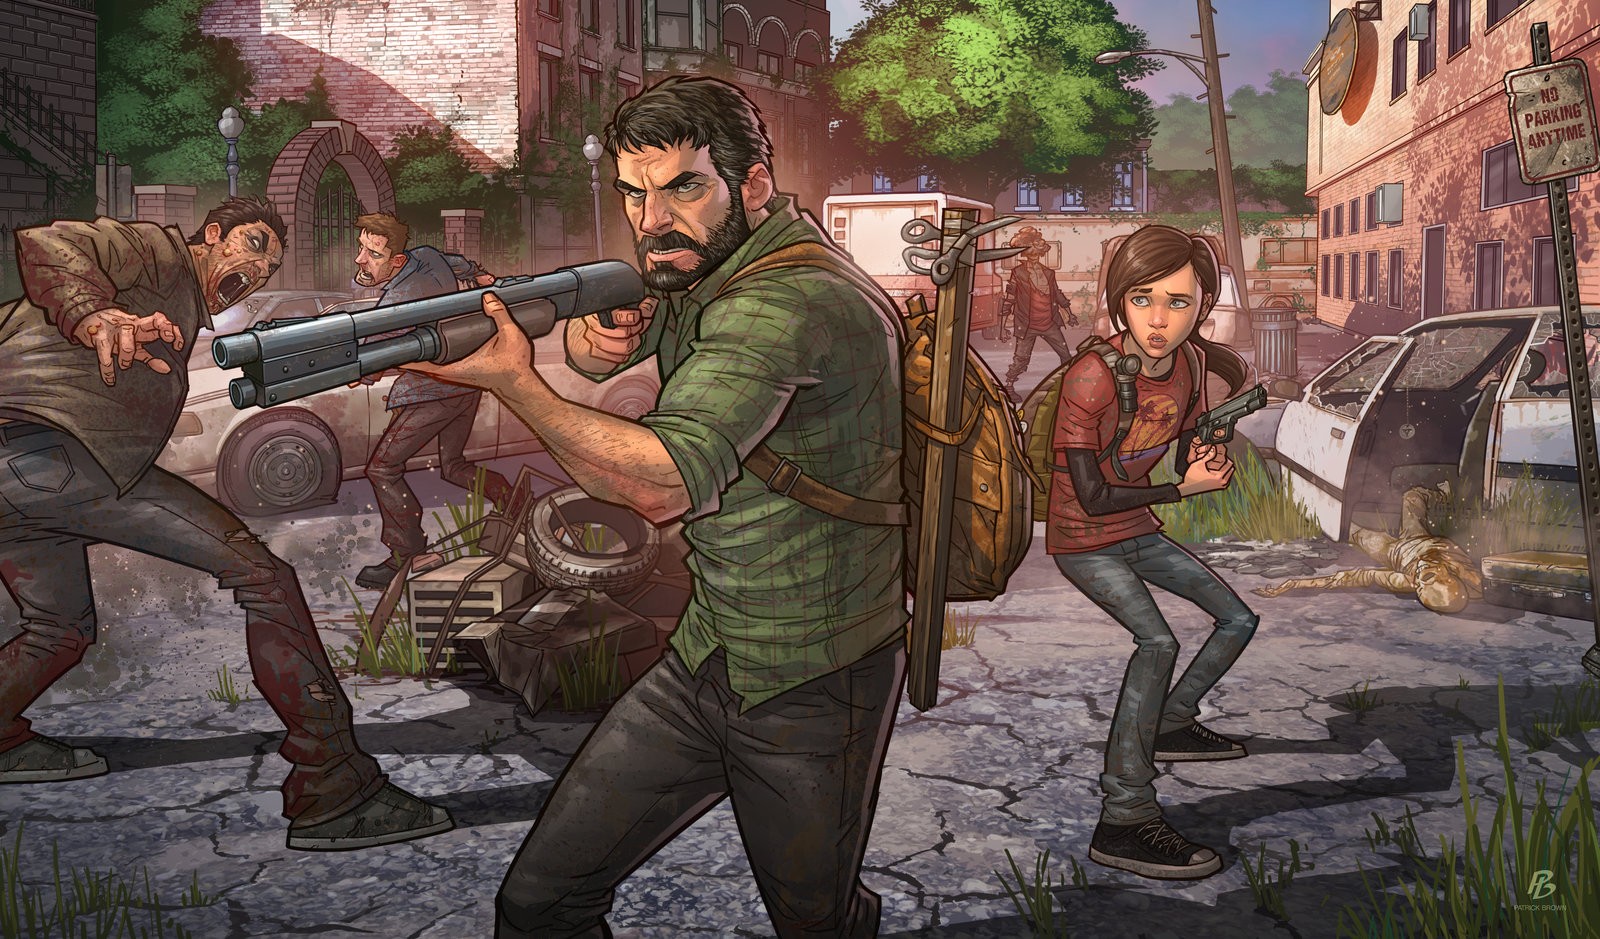 General 1600x939 The Last of Us video game art apocalyptic video games weapon science fiction gun boys with guns signs girls with guns building aiming beard Patrick Brown logo watermarked